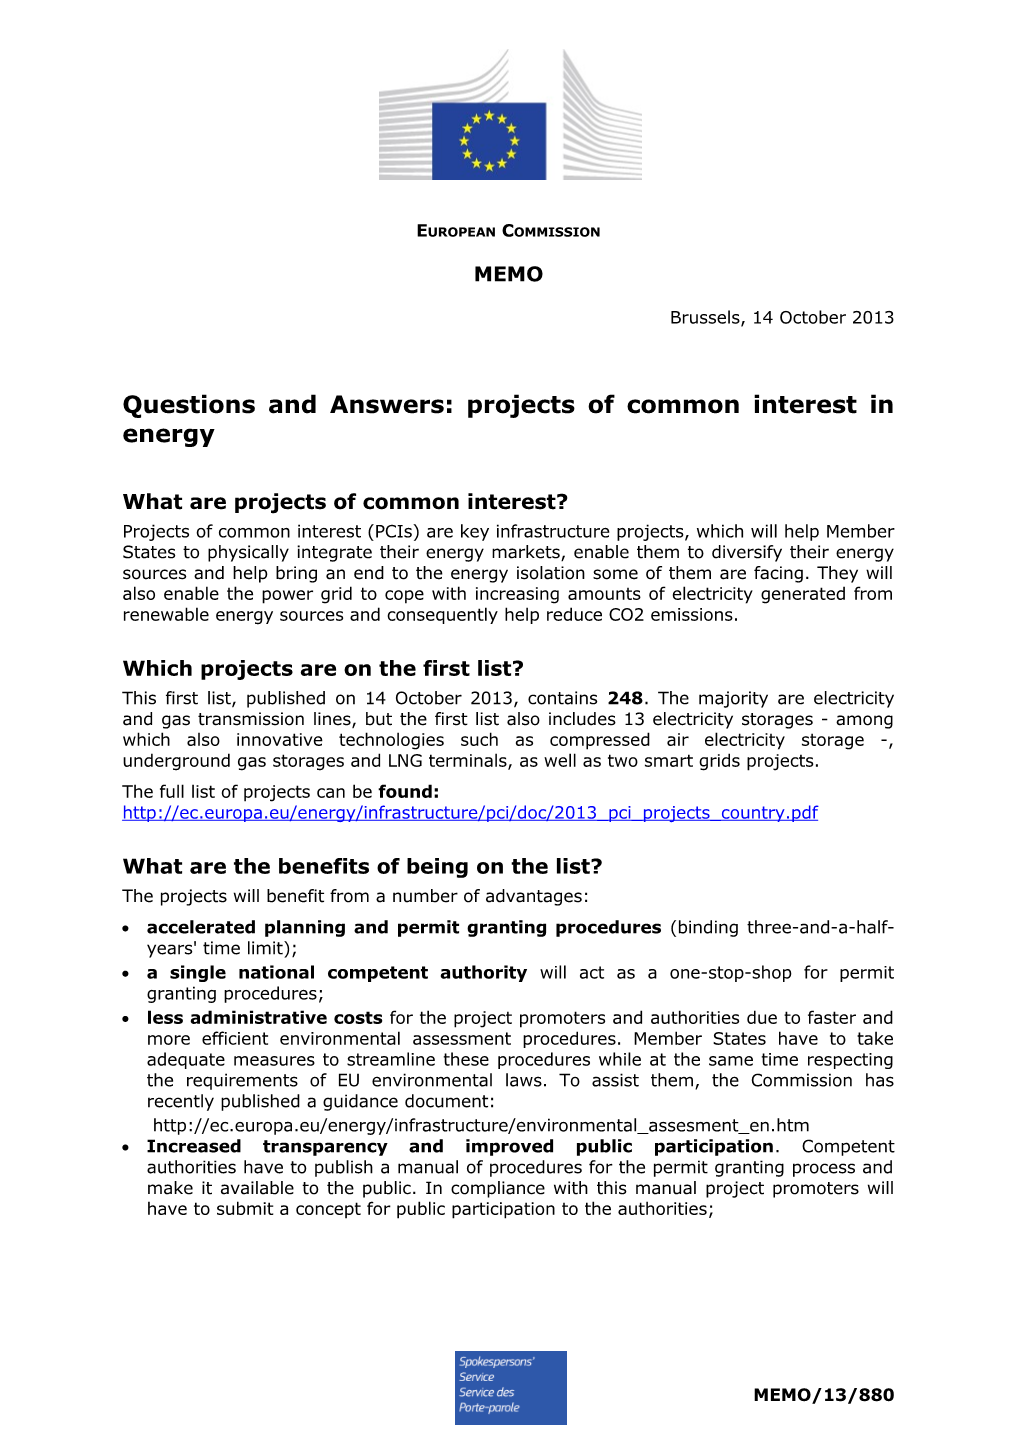 Questions and Answers: Projects of Common Interest in Energy